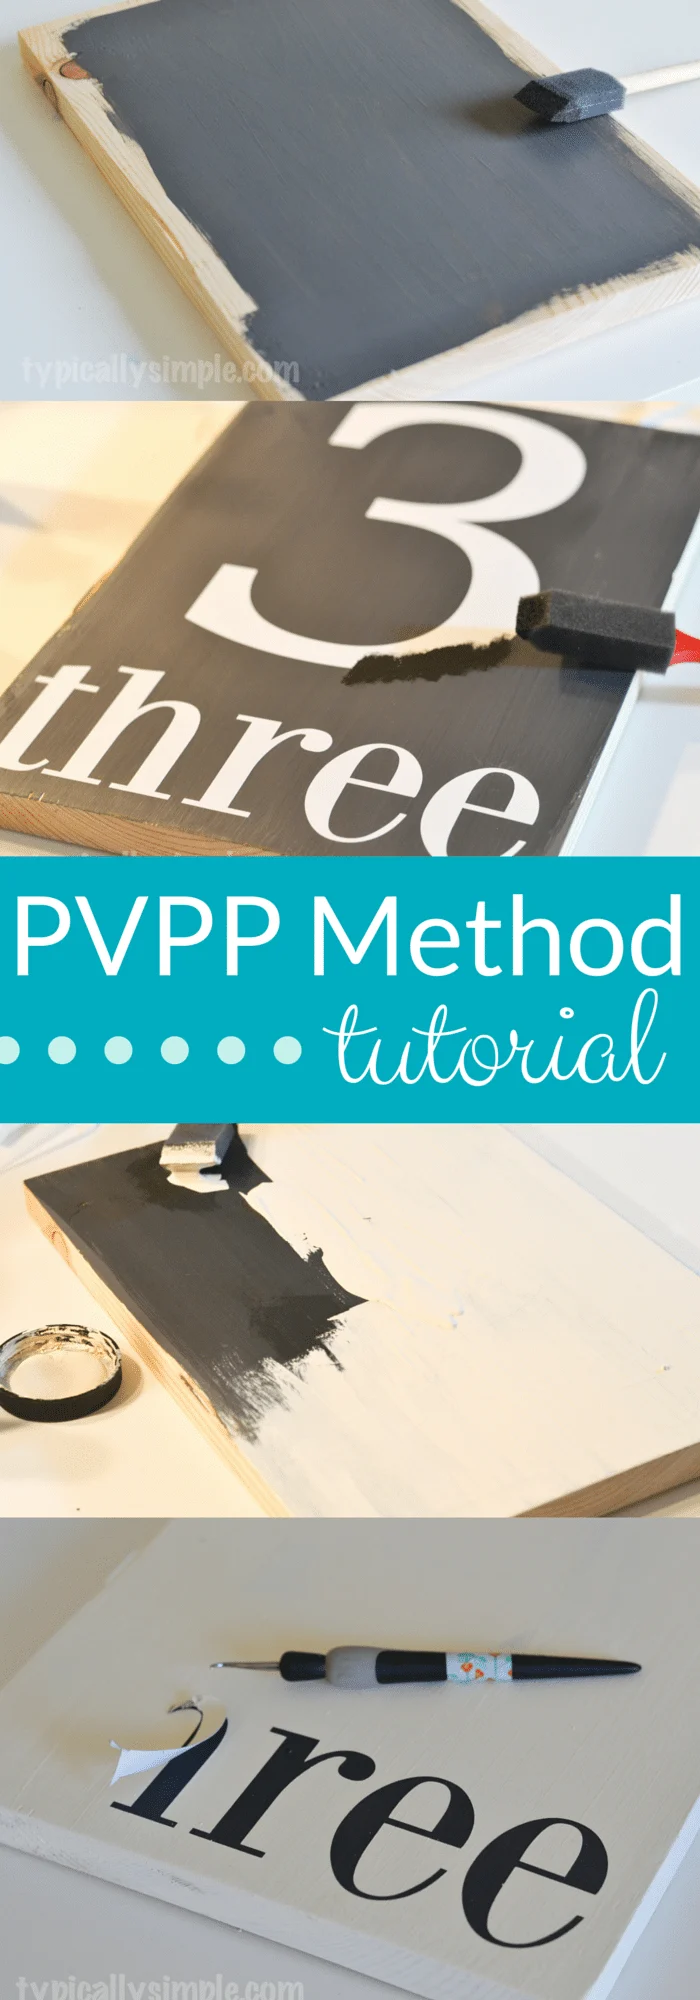 Have you been hearing about the PVPP method? Wondering how it's done? Look no further! Here's a step-by-step tutorial on how to use your Silhouette to create a hand painted sign using the Paint, Vinyl, Paint, Peel method. | TypicallySimple.com